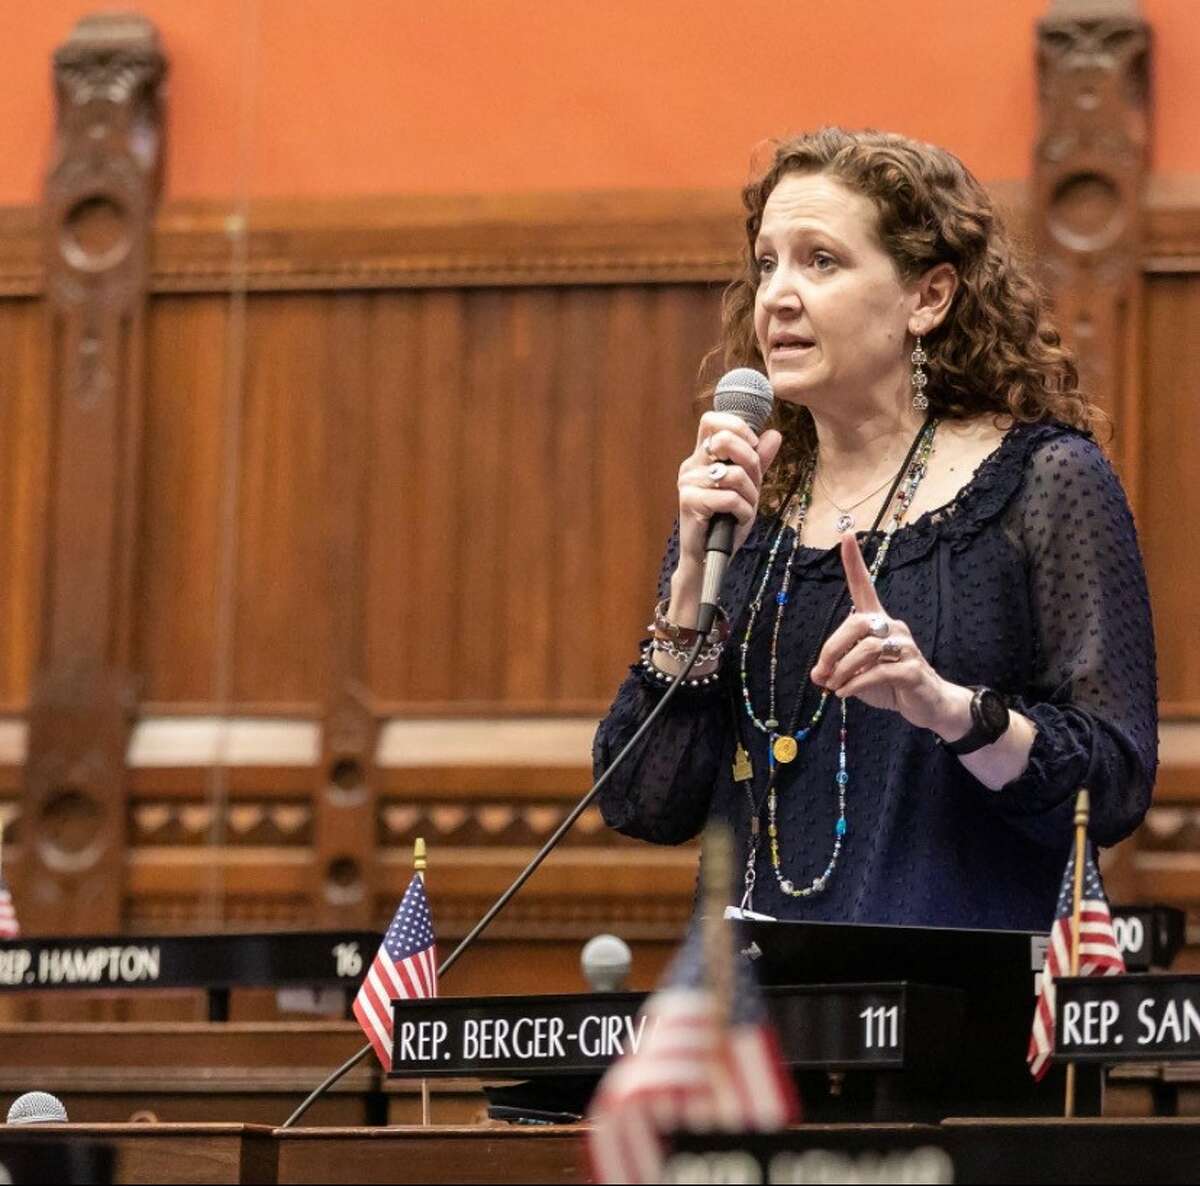 State Rep. Aimee Berger-Girvalo is defending herself against misrepresentations and false claims about her voting record circulated by her campaign opponent, Bob Hebert.